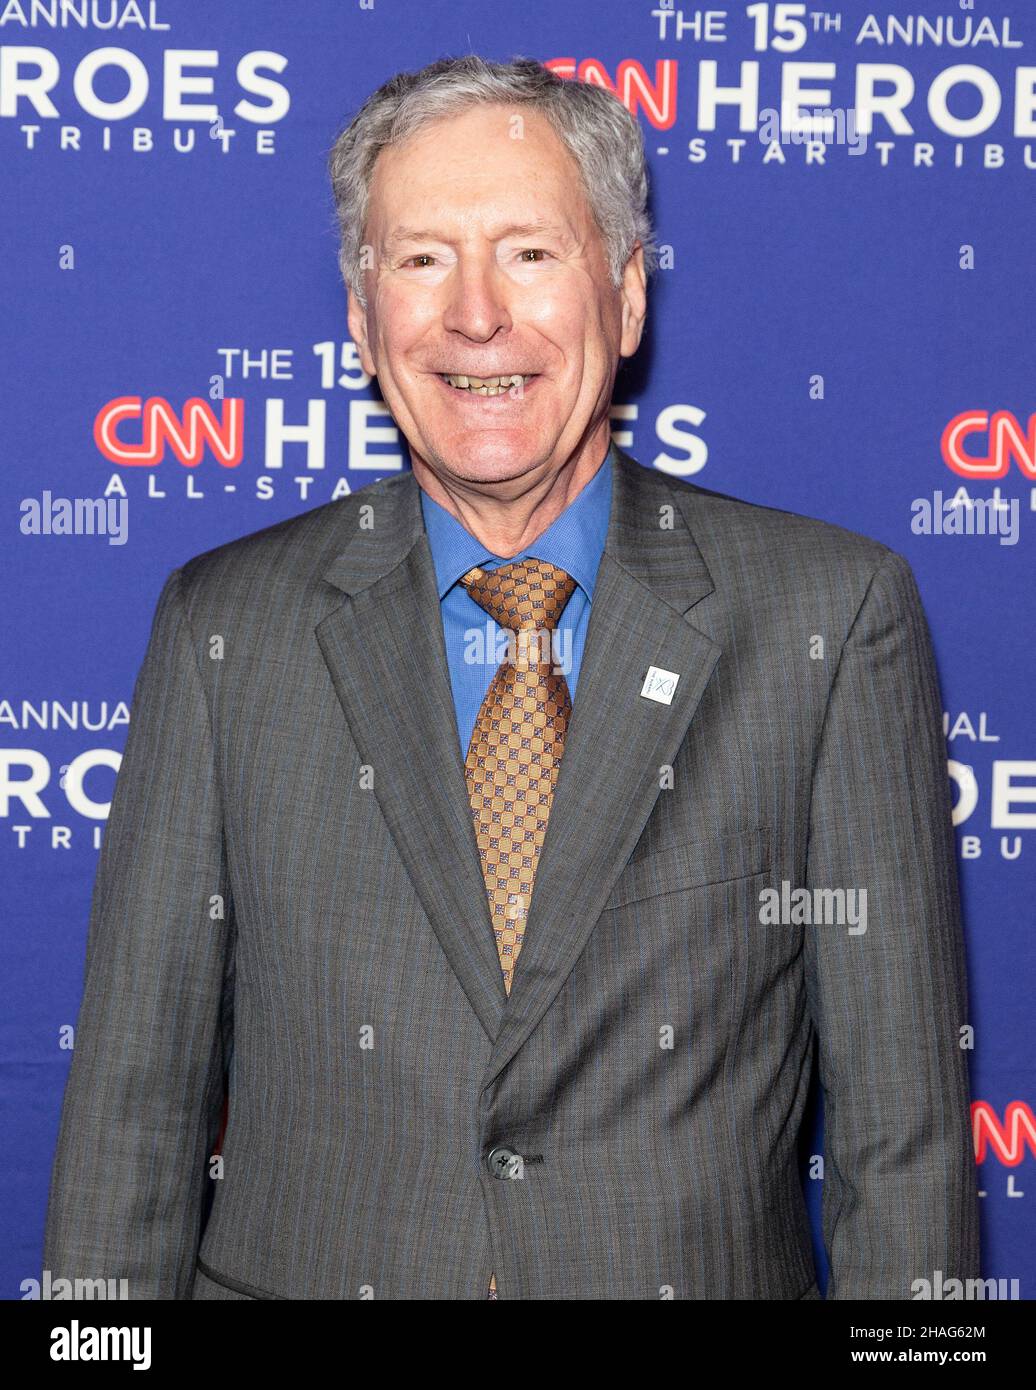 New York, USA. 12th Dec, 2021. President and CEO of Subaru of America Tom Doll attends 15th Annual CNN Heroes All-Star Tribute at American Museum of Natural History in New York on December 12, 2021. (Photo by Lev Radin/Sipa USA) Credit: Sipa USA/Alamy Live News Stock Photo